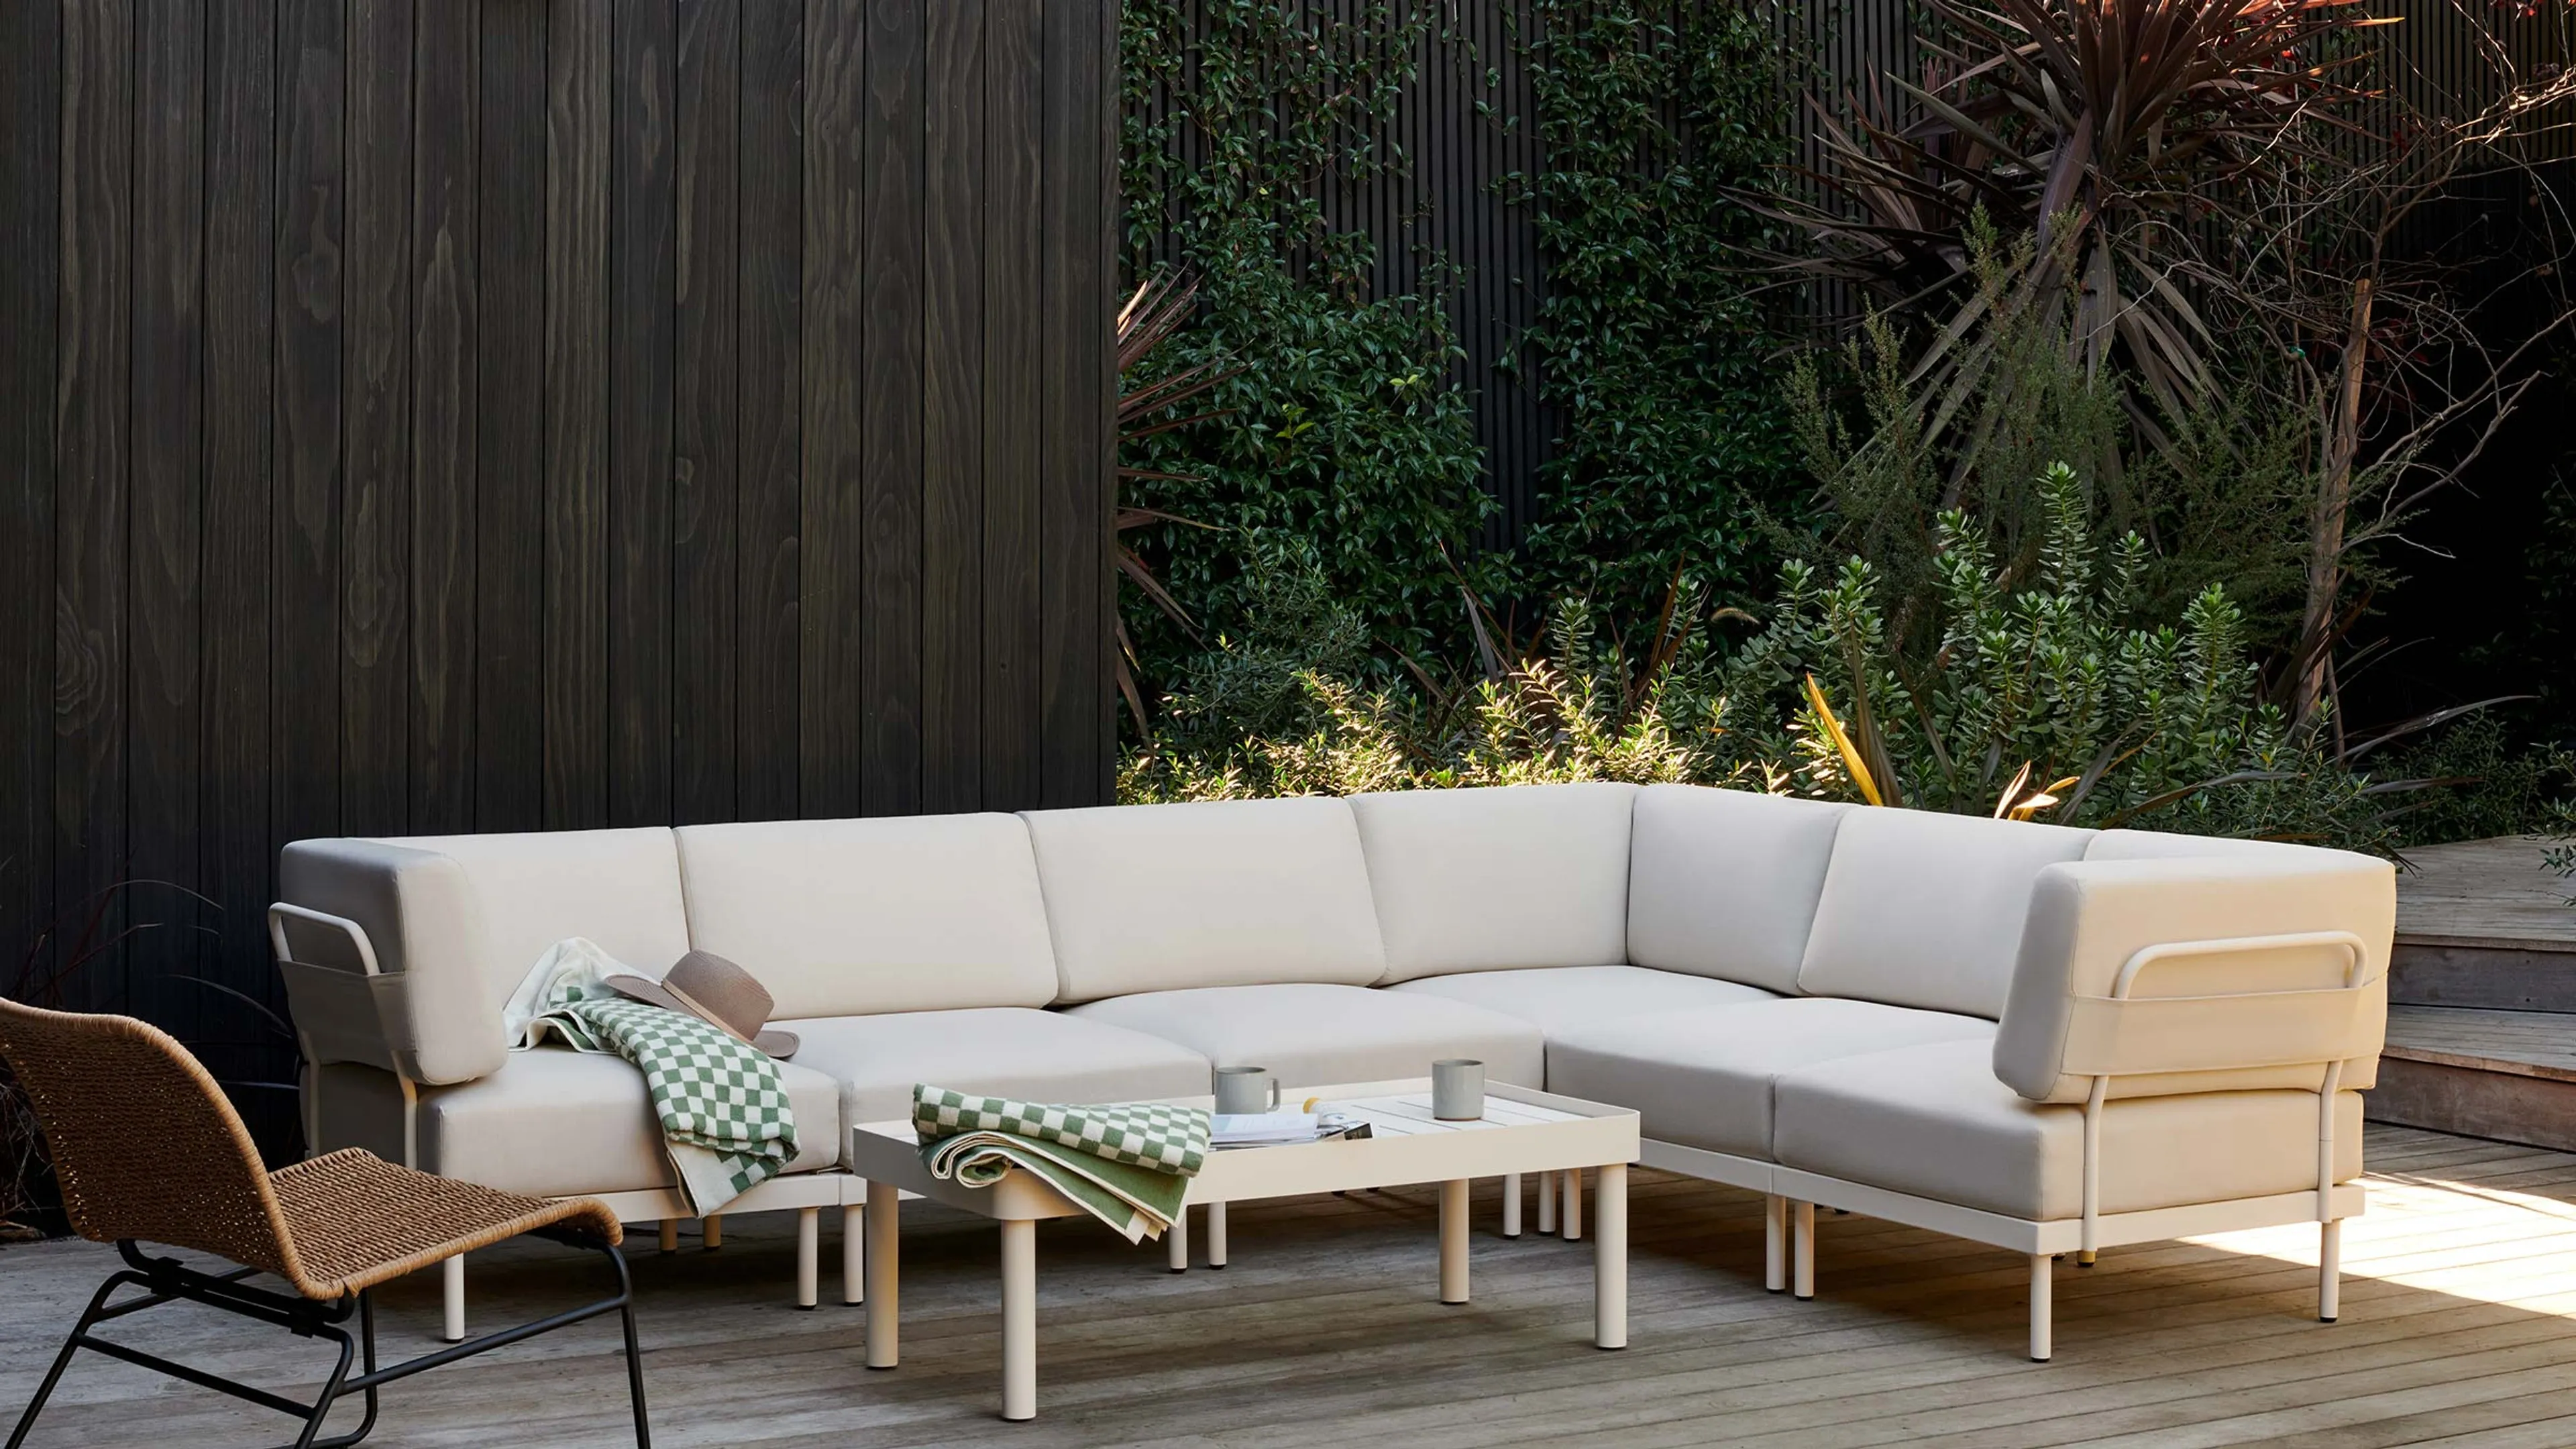 Relay Outdoor 5-Piece Armless Sectional